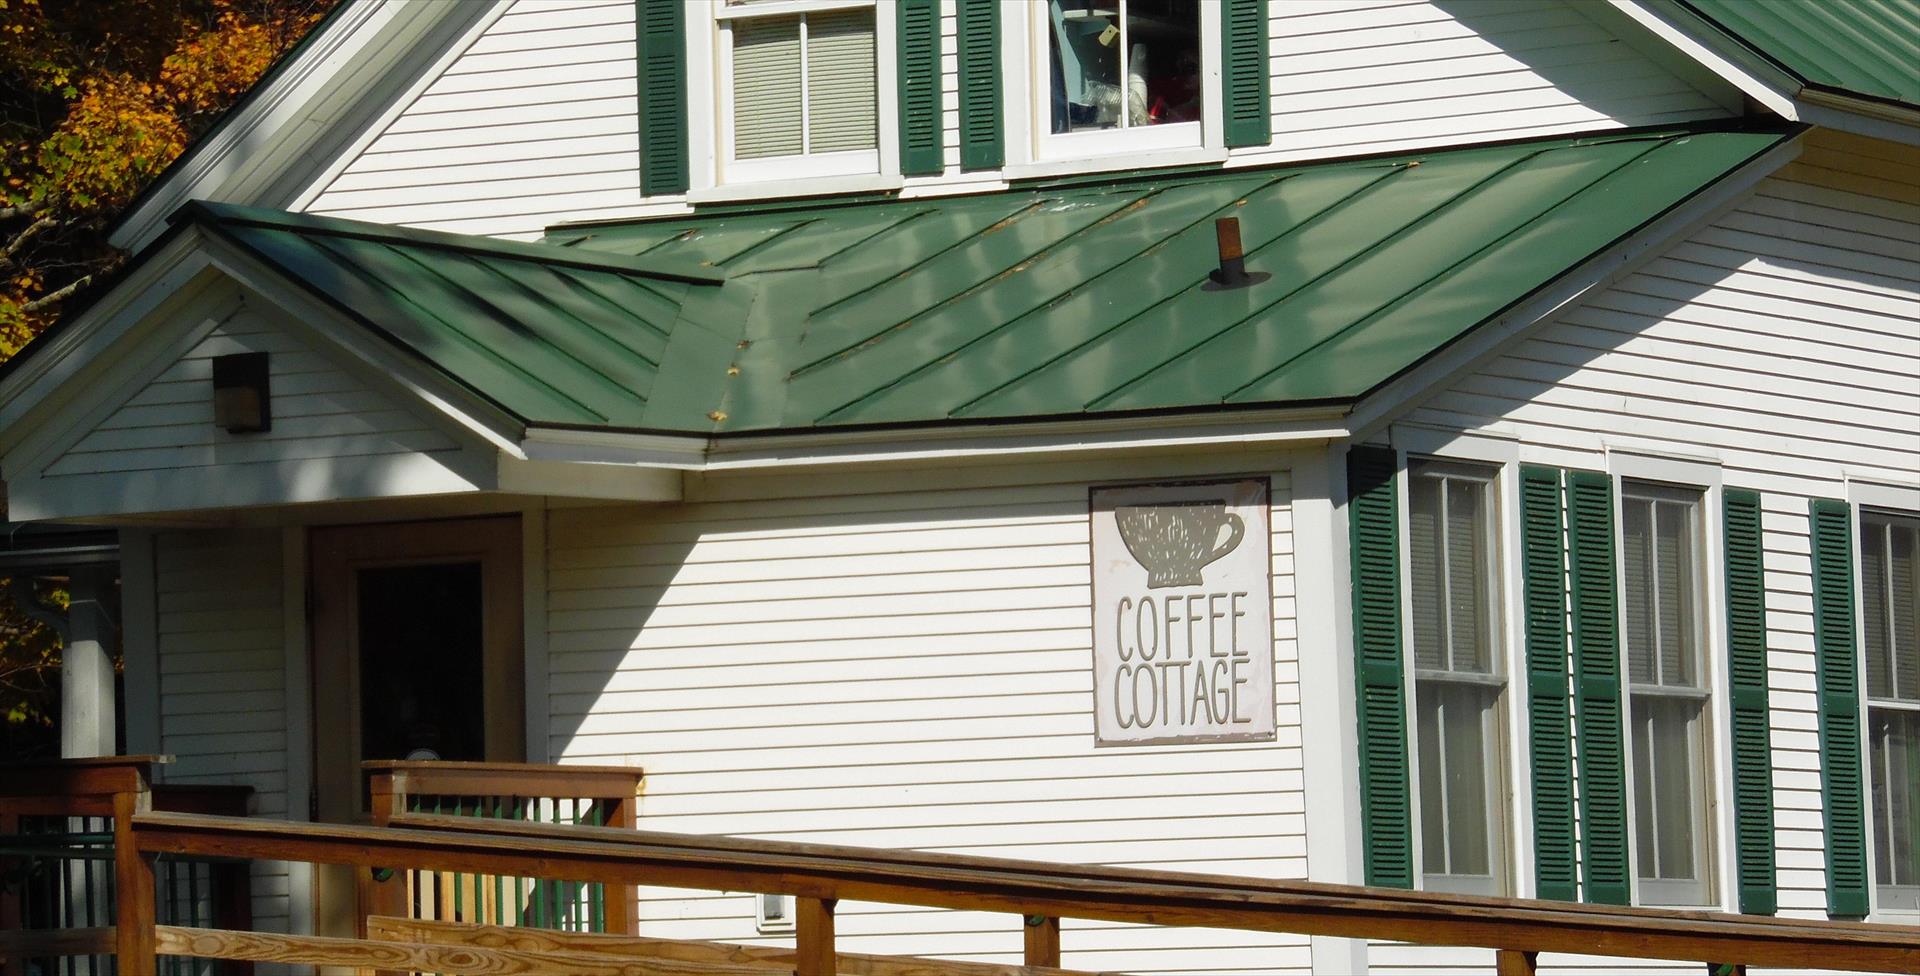 Free coffee opportunity at the Coffee Cottage!!